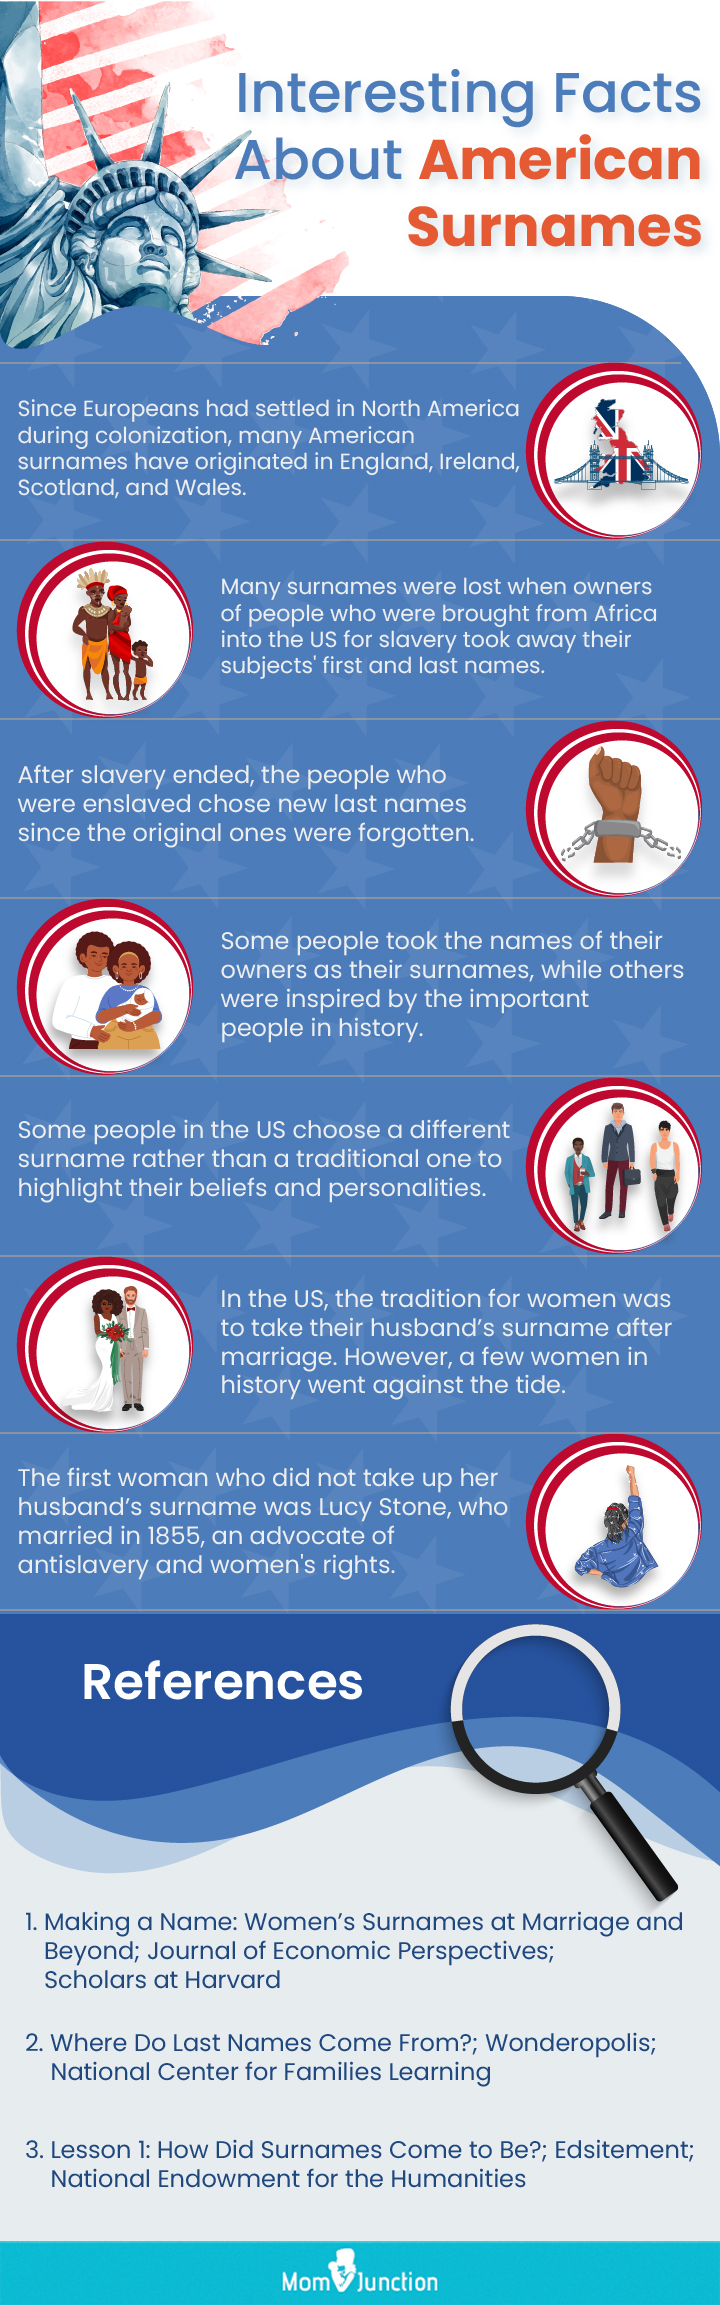 interesting facts about american surnames [infographic]